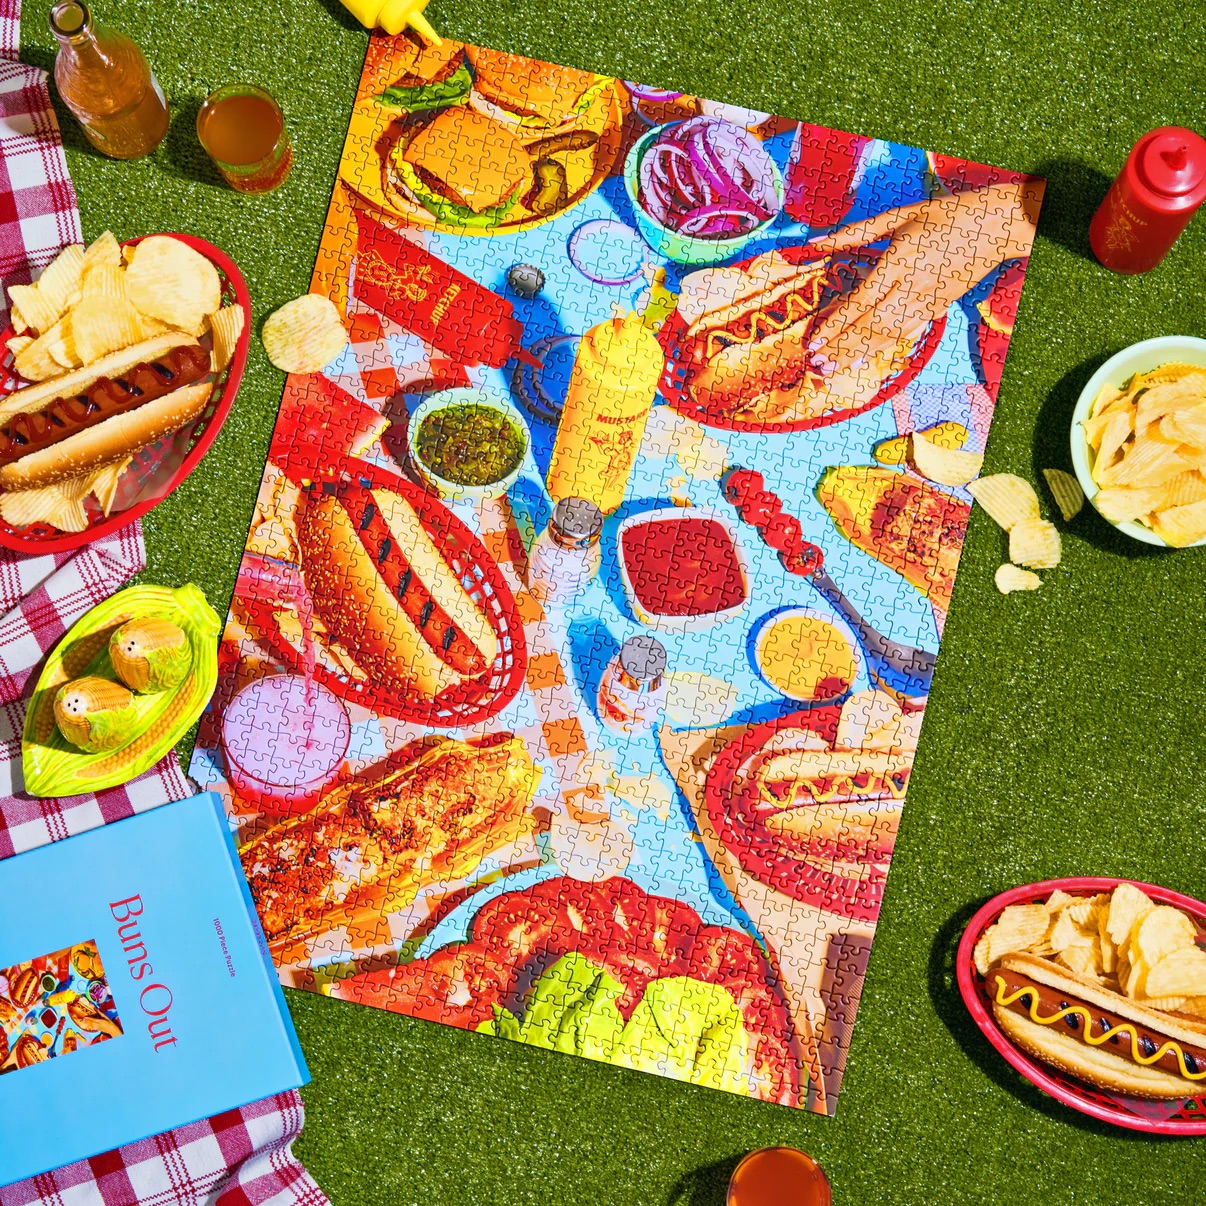 Buns out puzzle from Piecework Puzzles featuring an image of hot dogs and hamburgers on a picnic table